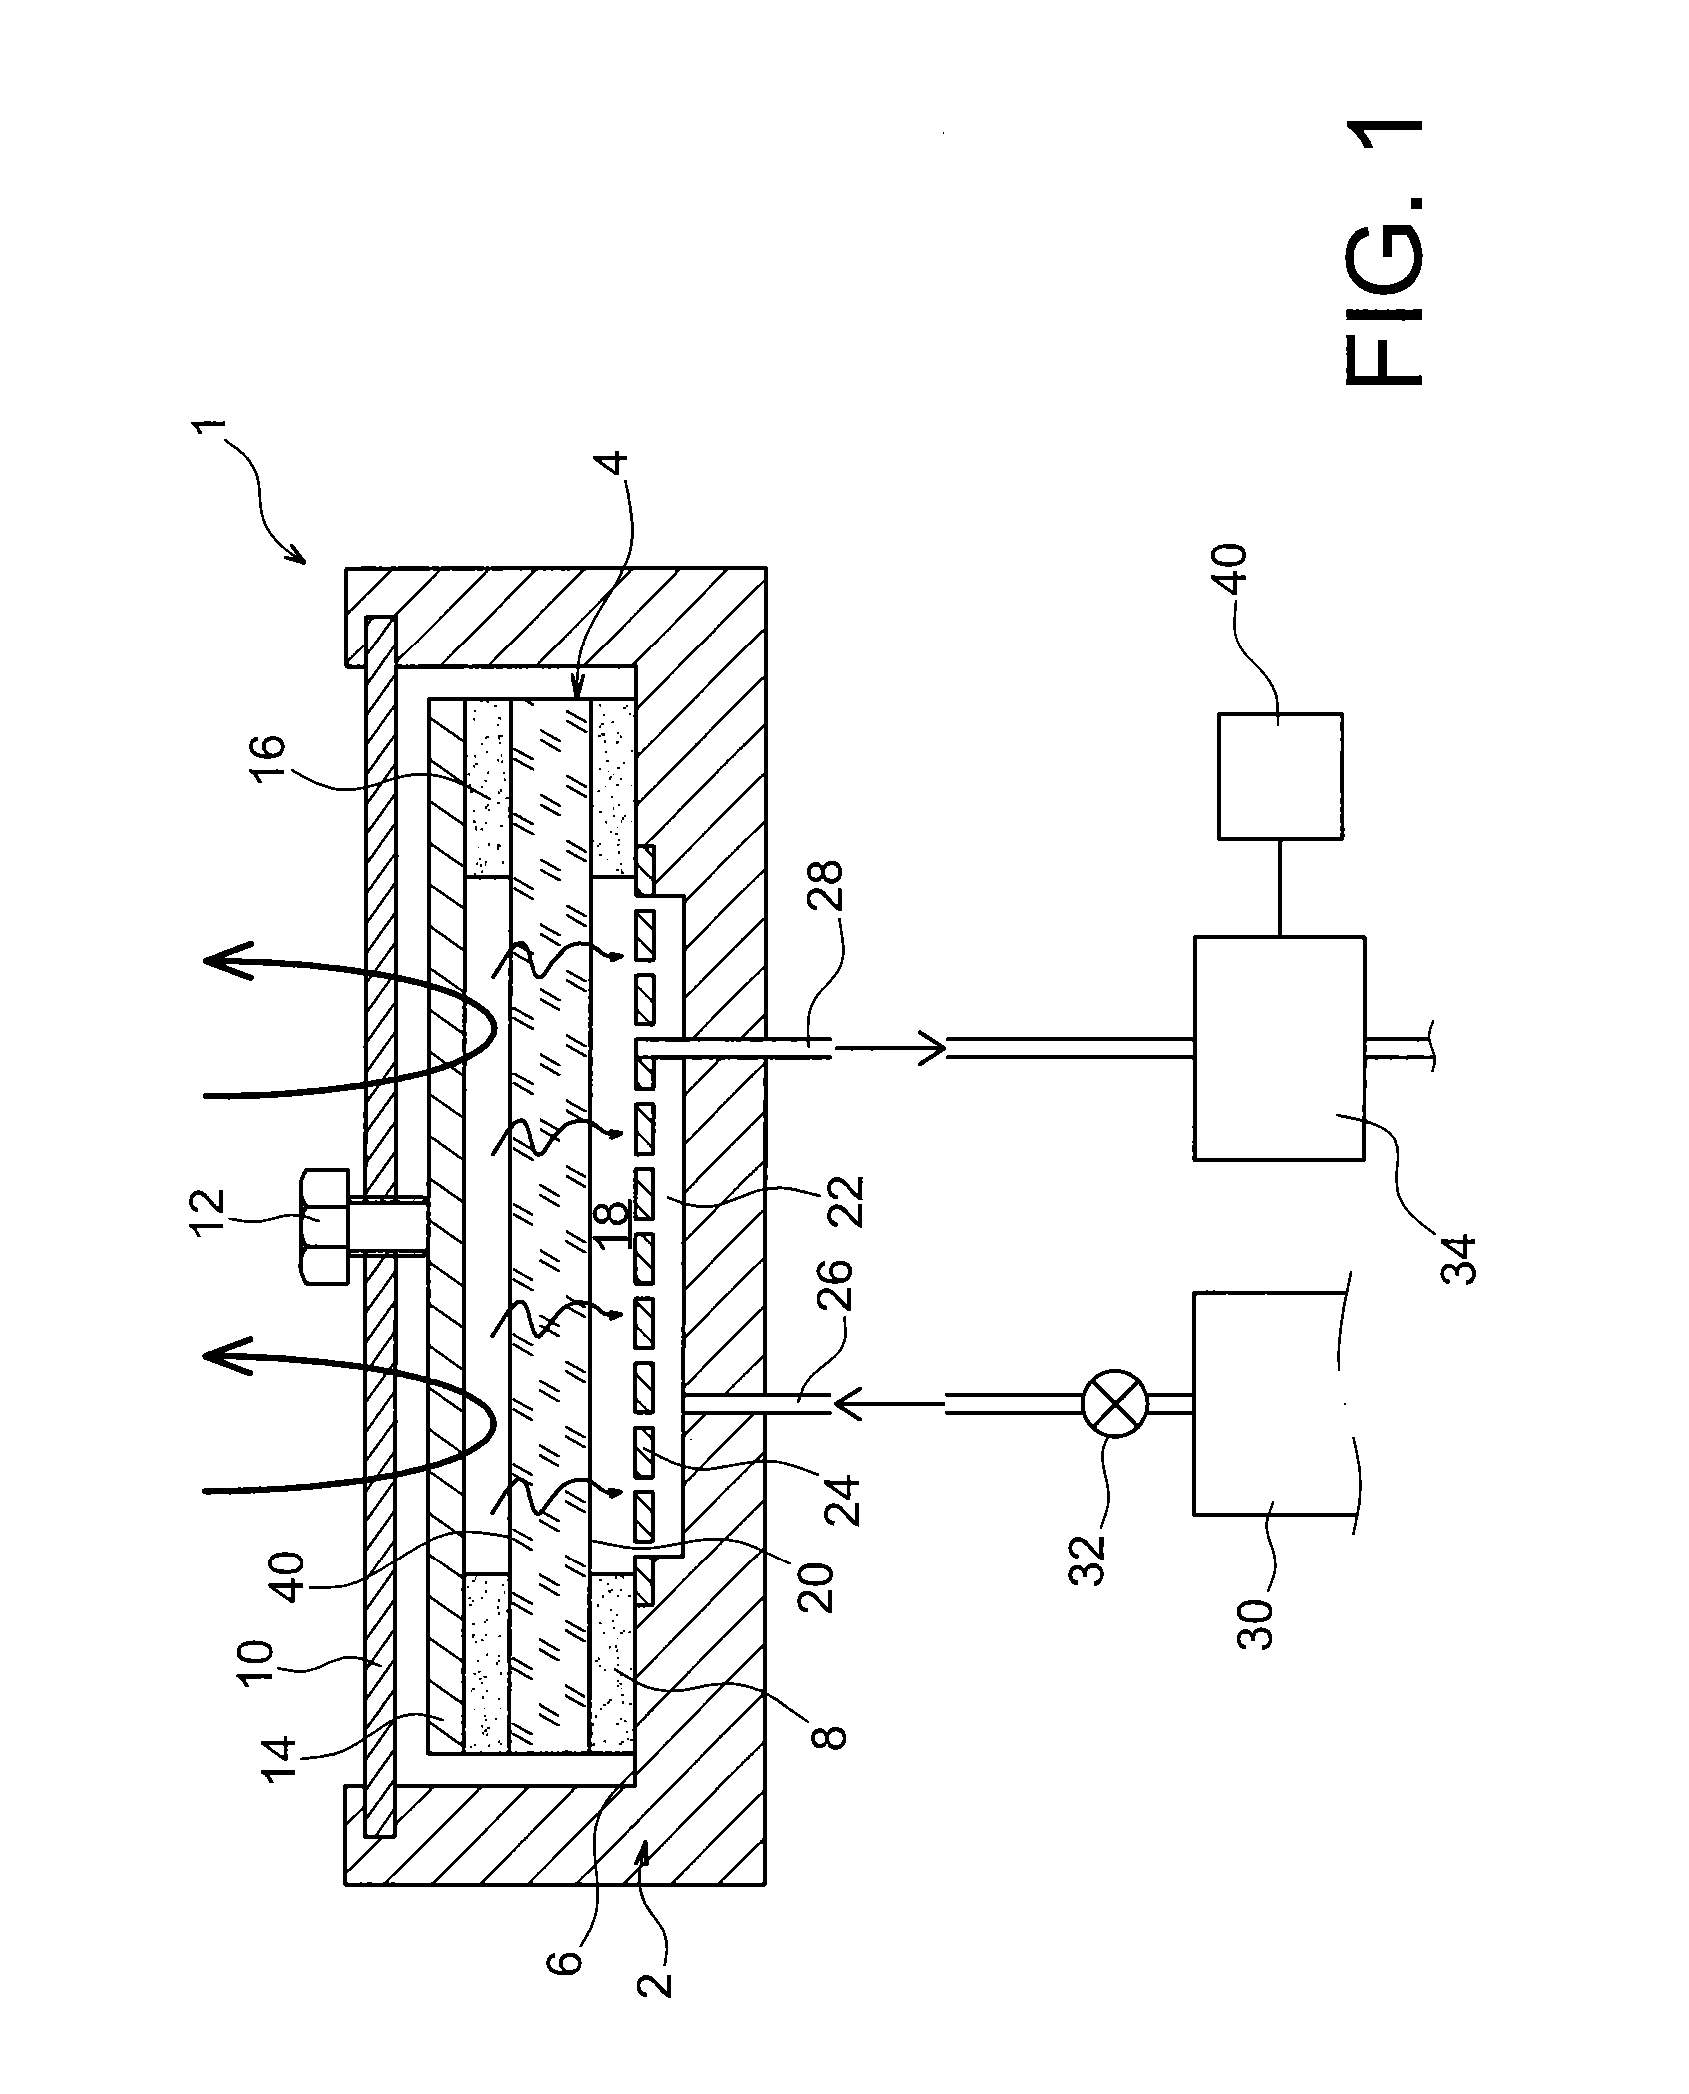 Non-destructive method for testing the seal of an electrolyte of an electrochemical cell